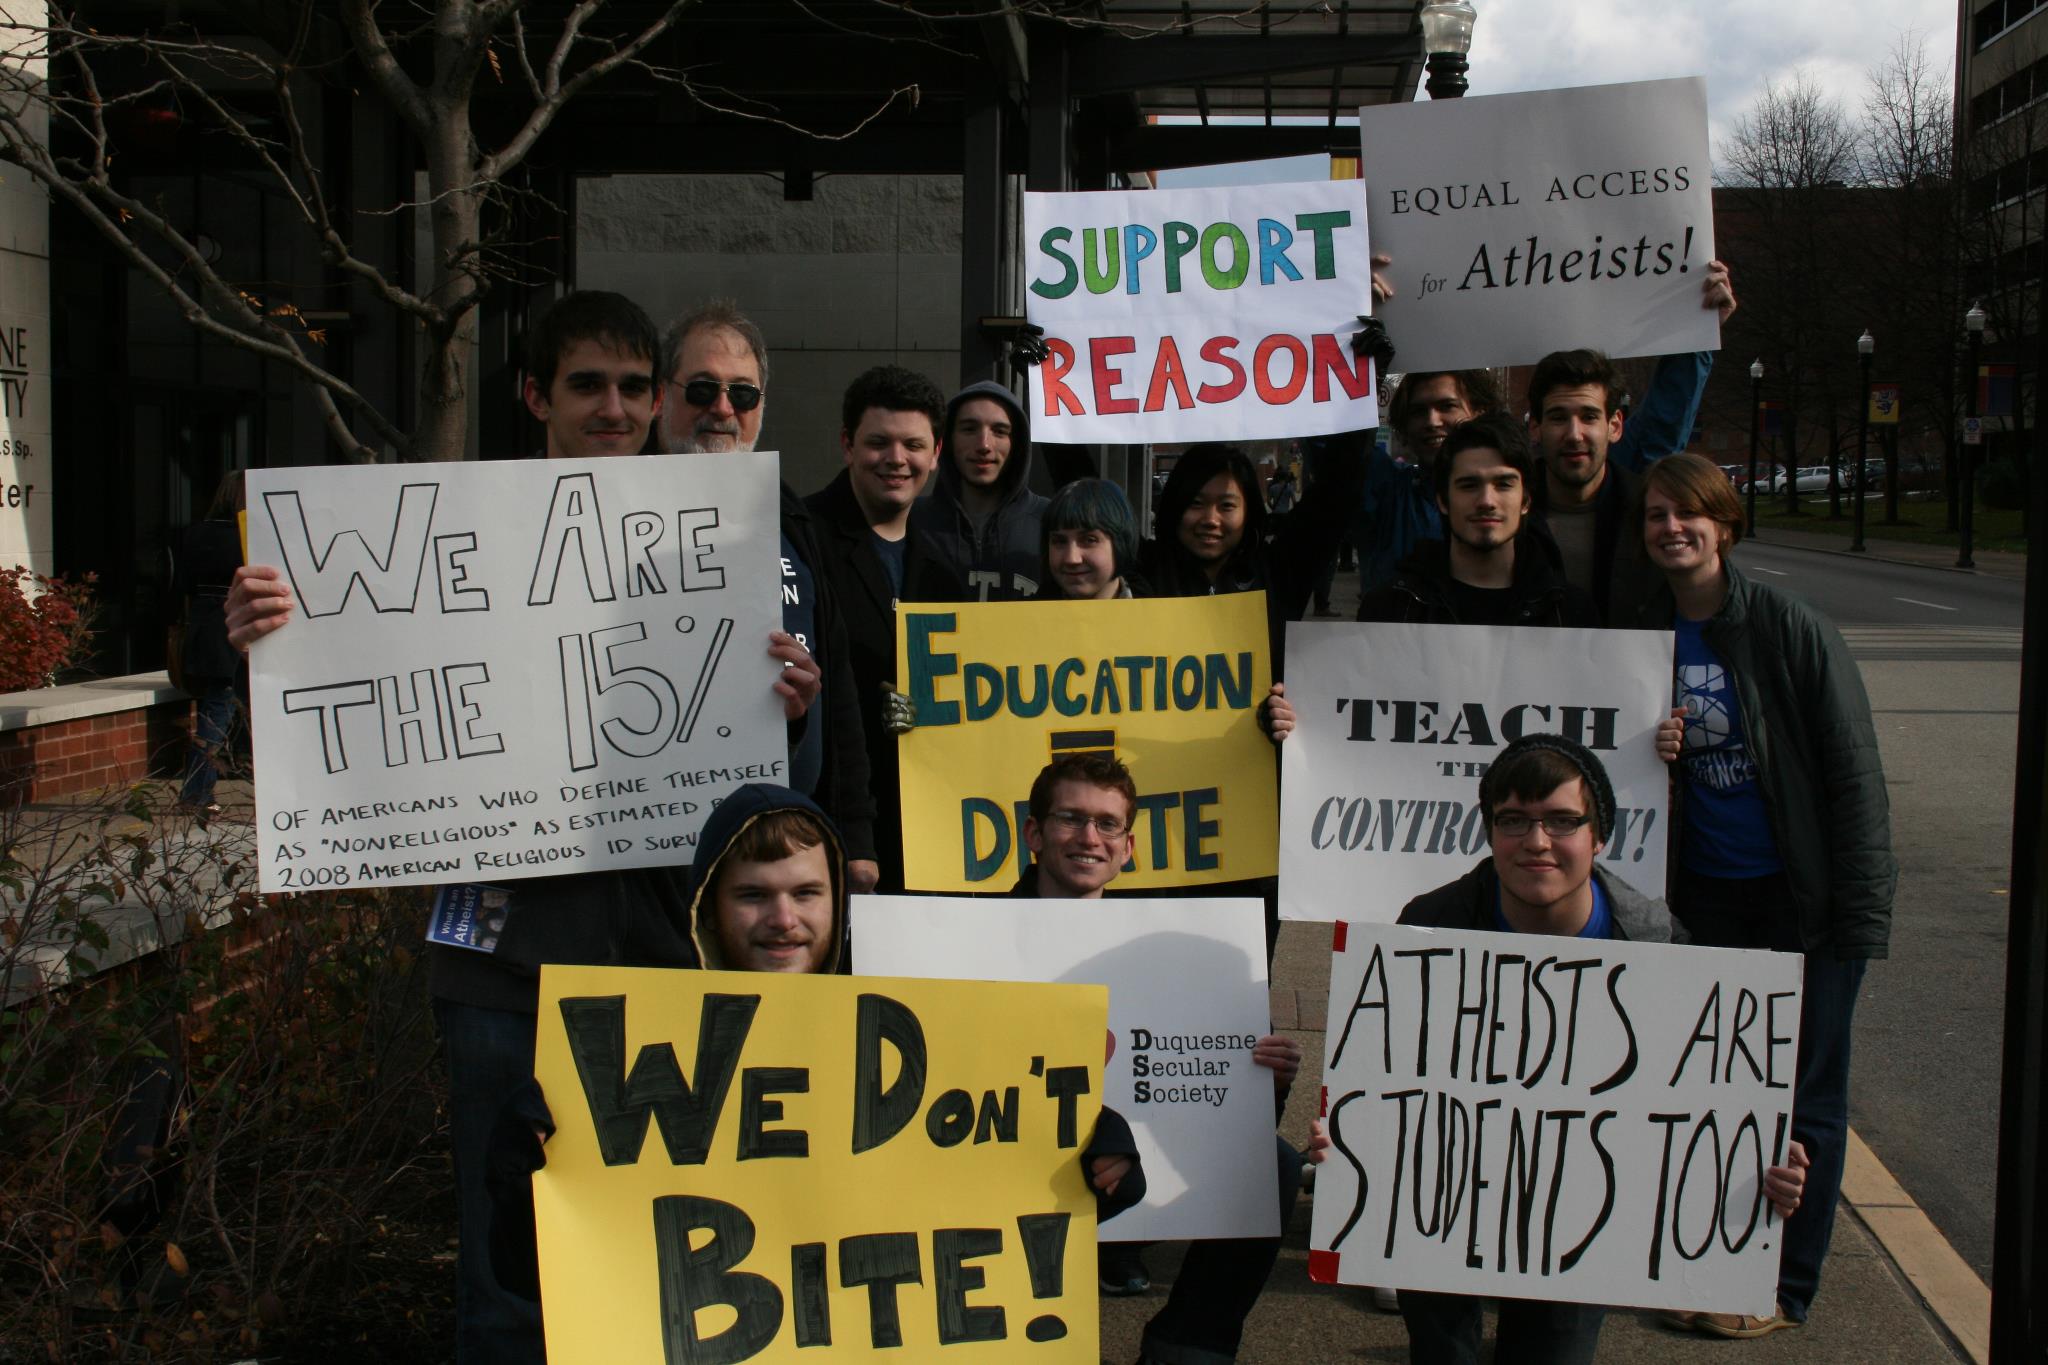 Students Protest After Duquesne University Rejects Atheist Group